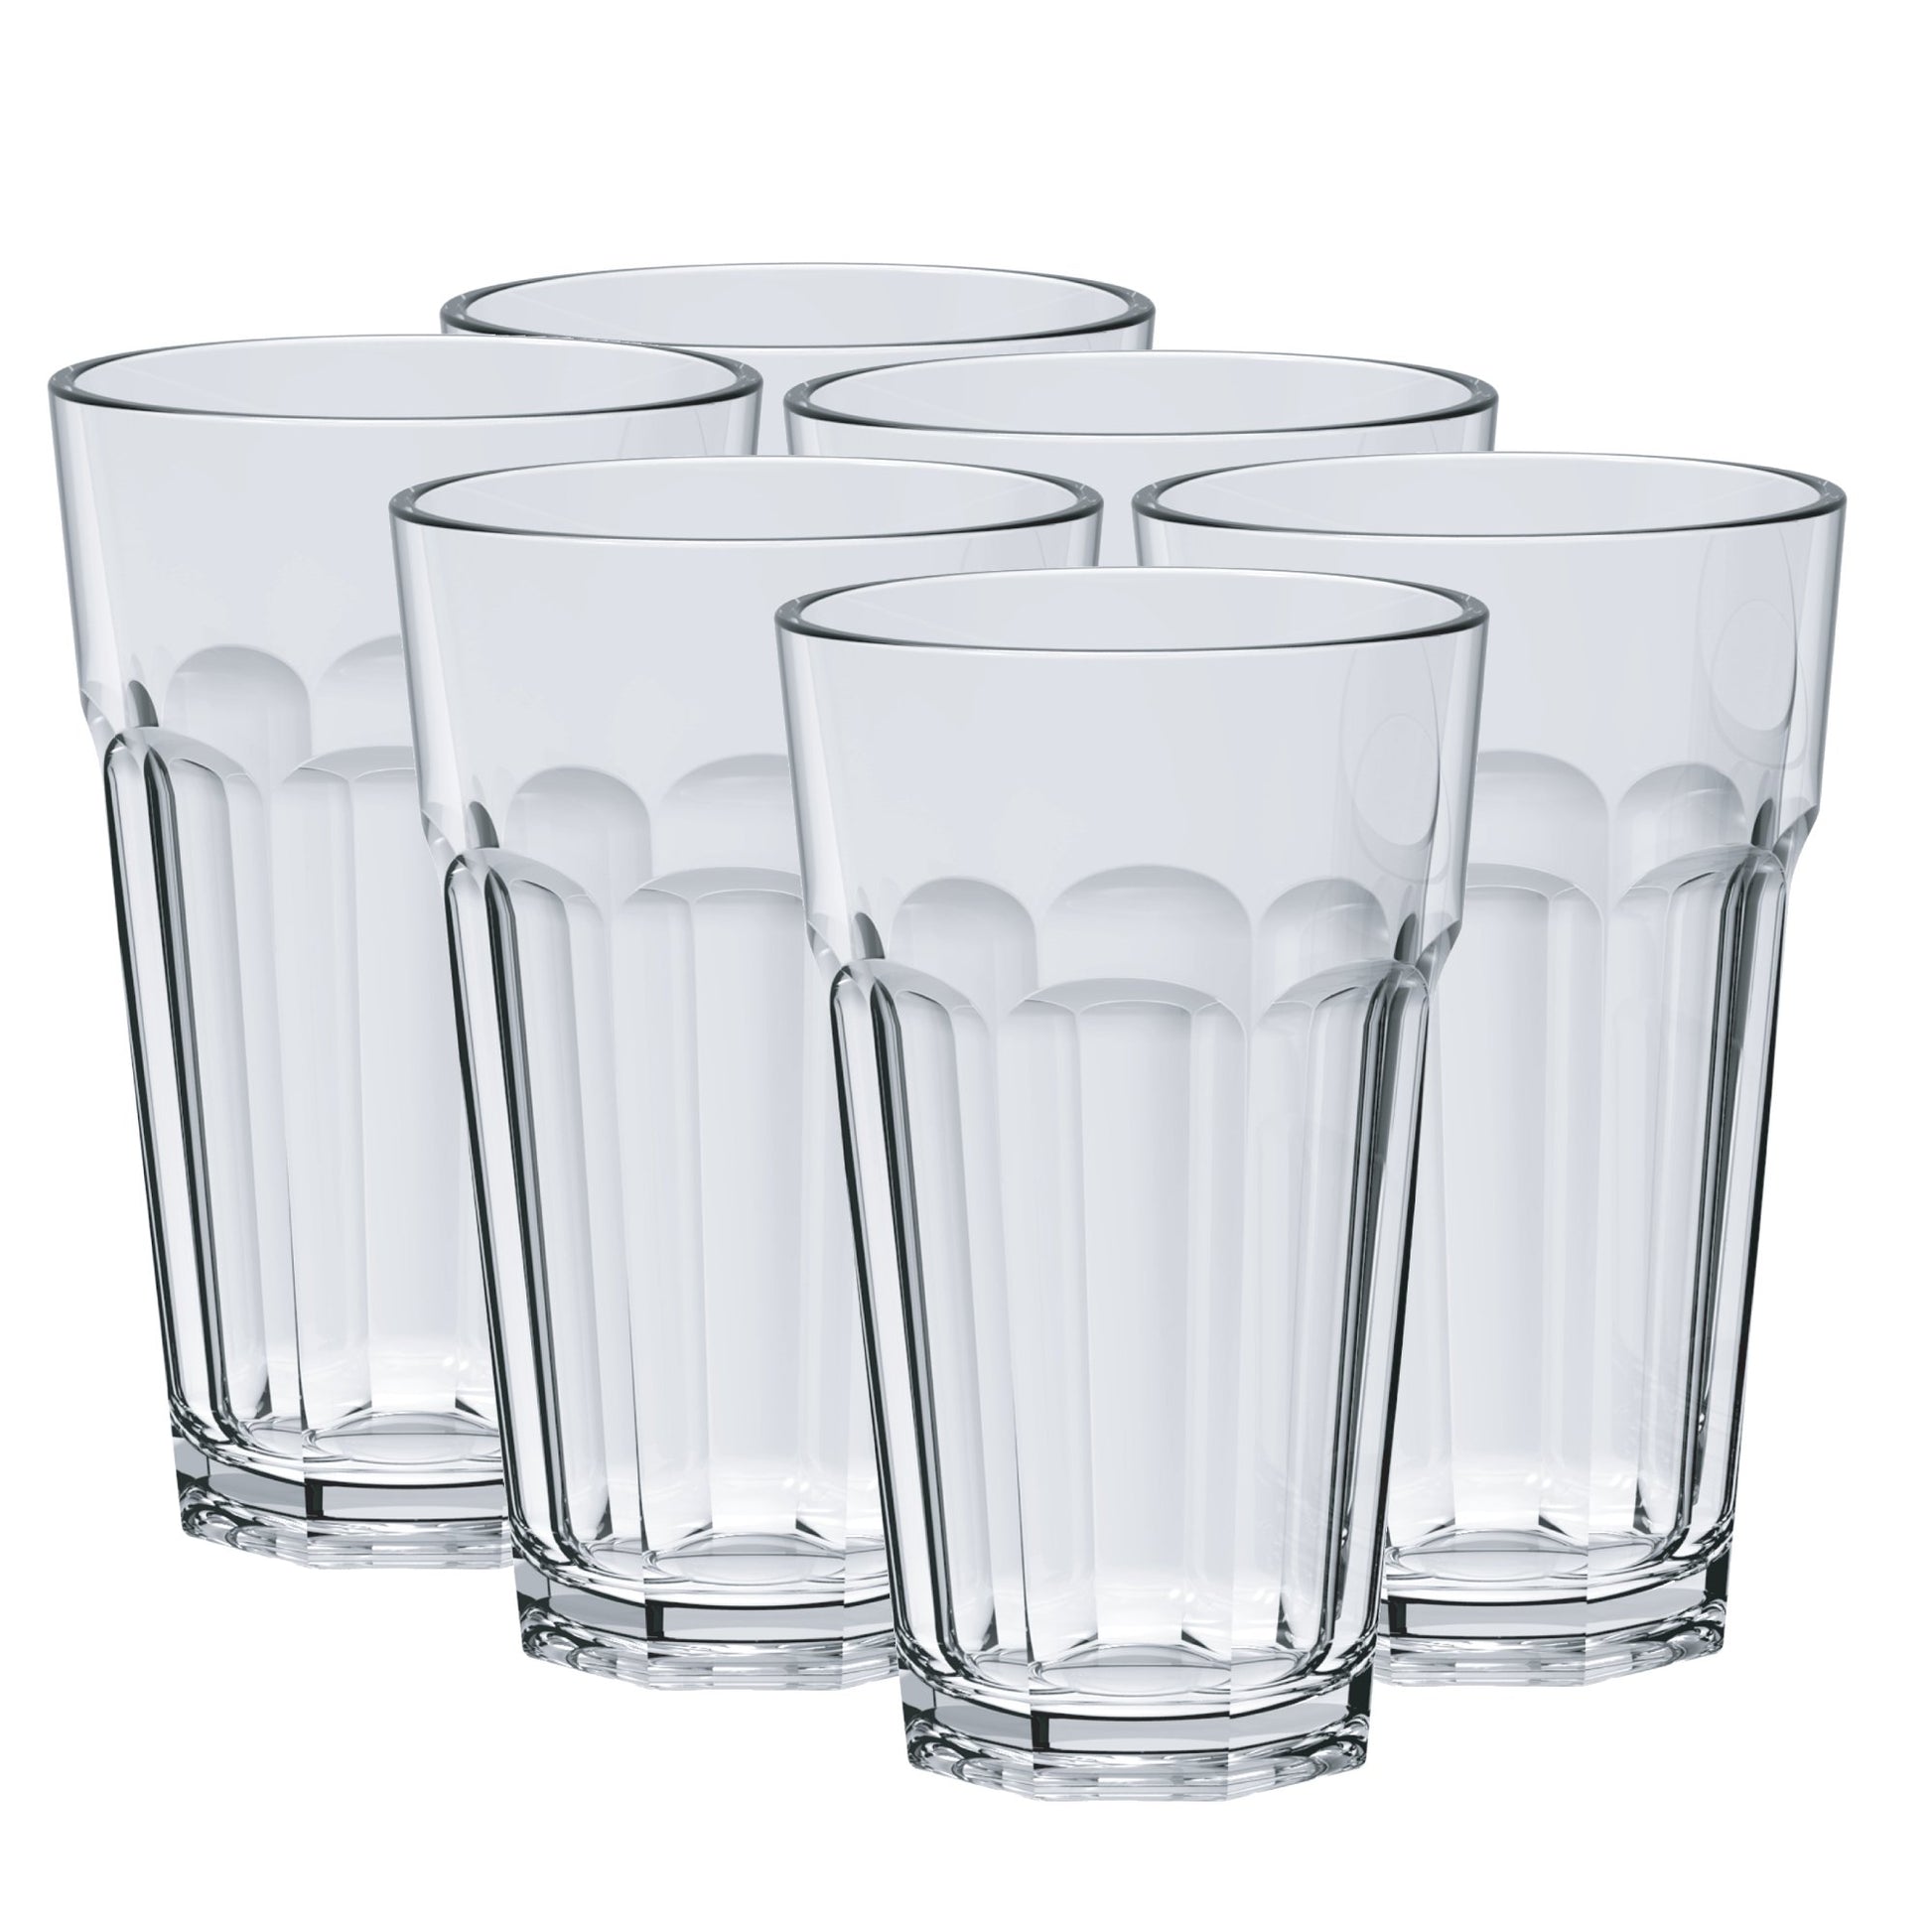 WEXINHAO Clear Drinking Glasses - Unbreakable Acrylic Glasses Drinkware 18  oz set of 6 - BPA Free Di…See more WEXINHAO Clear Drinking Glasses 